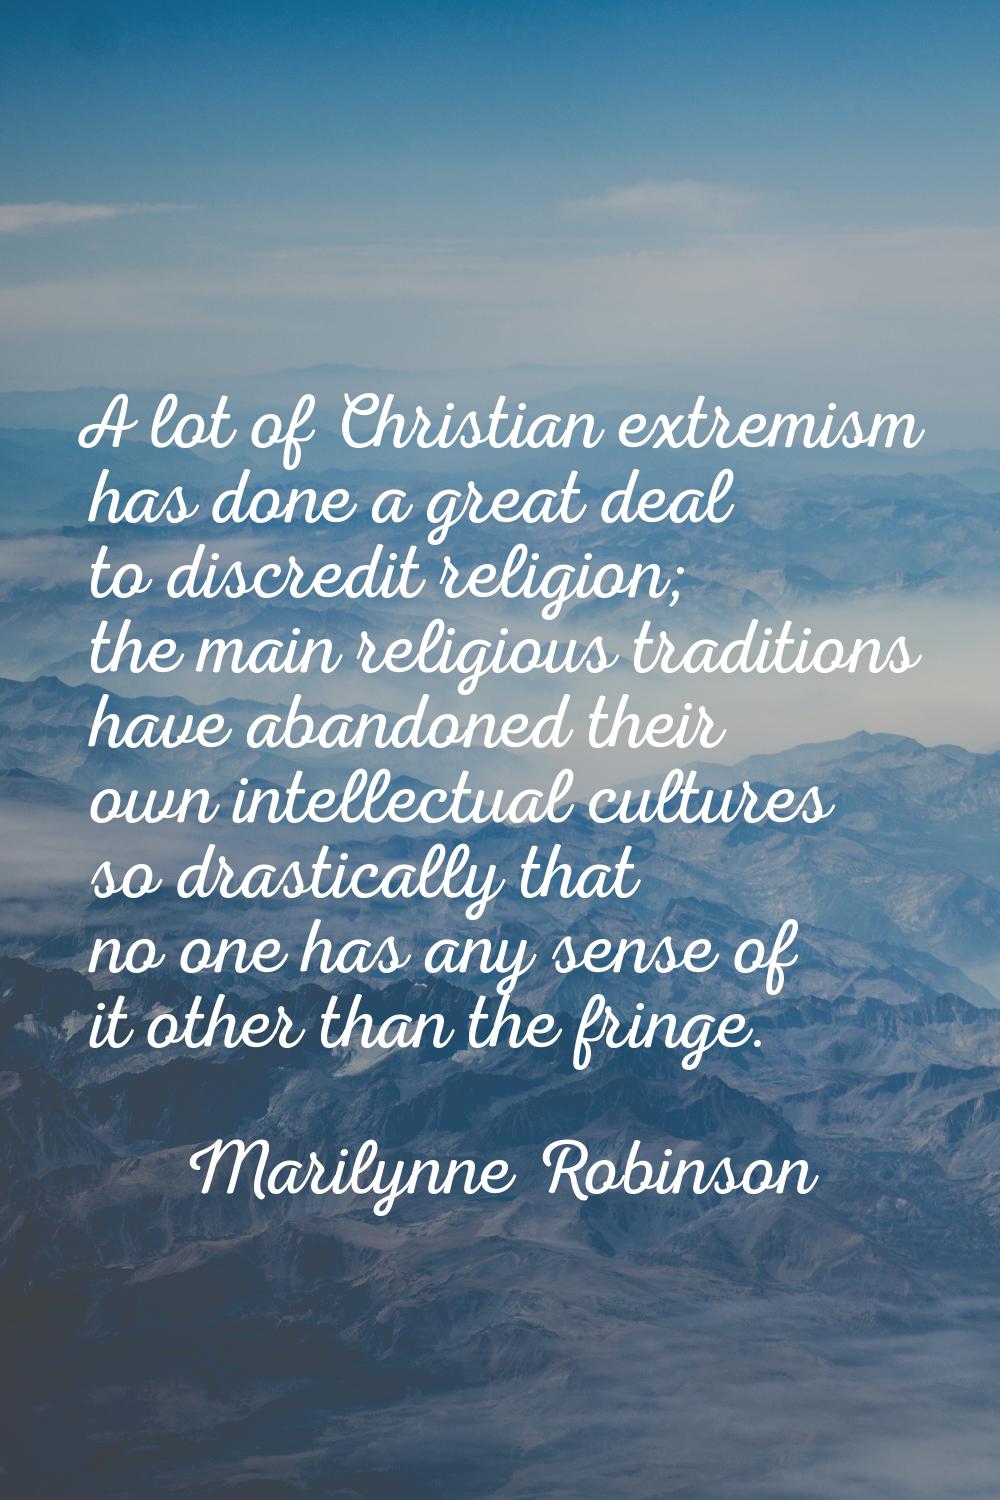 A lot of Christian extremism has done a great deal to discredit religion; the main religious tradit